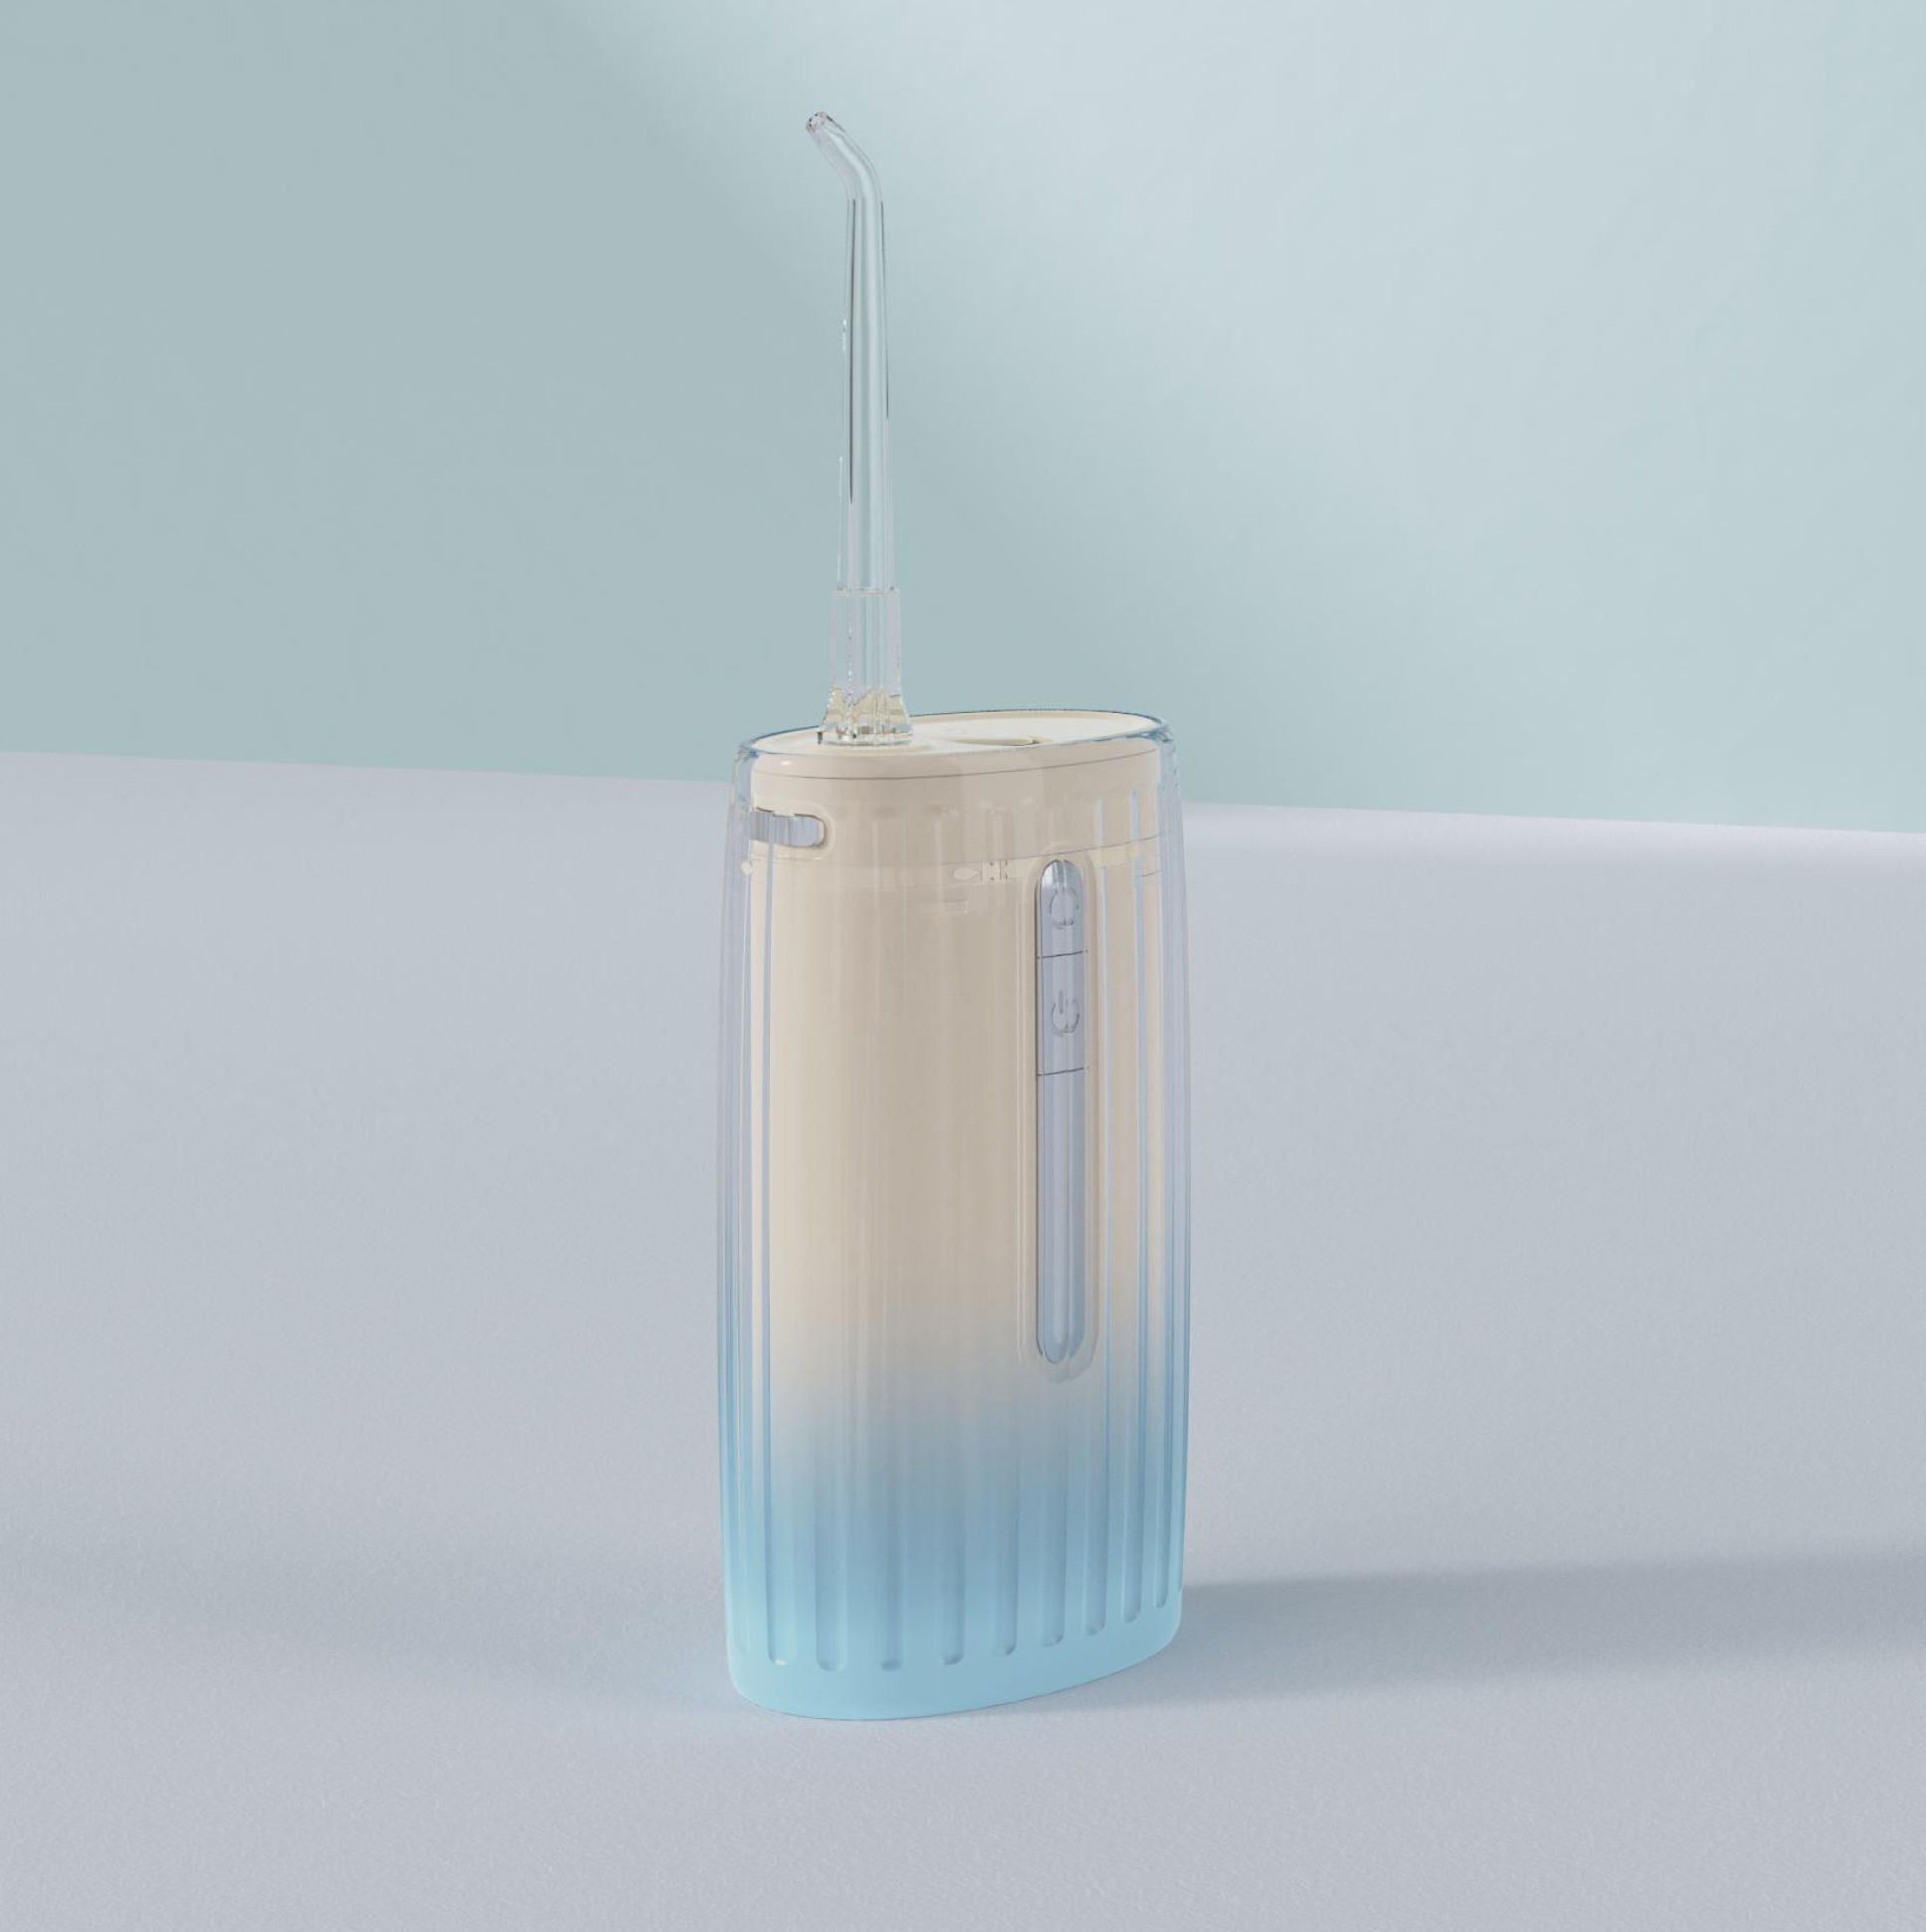 How long does it take to see results from dental oral irrigator?